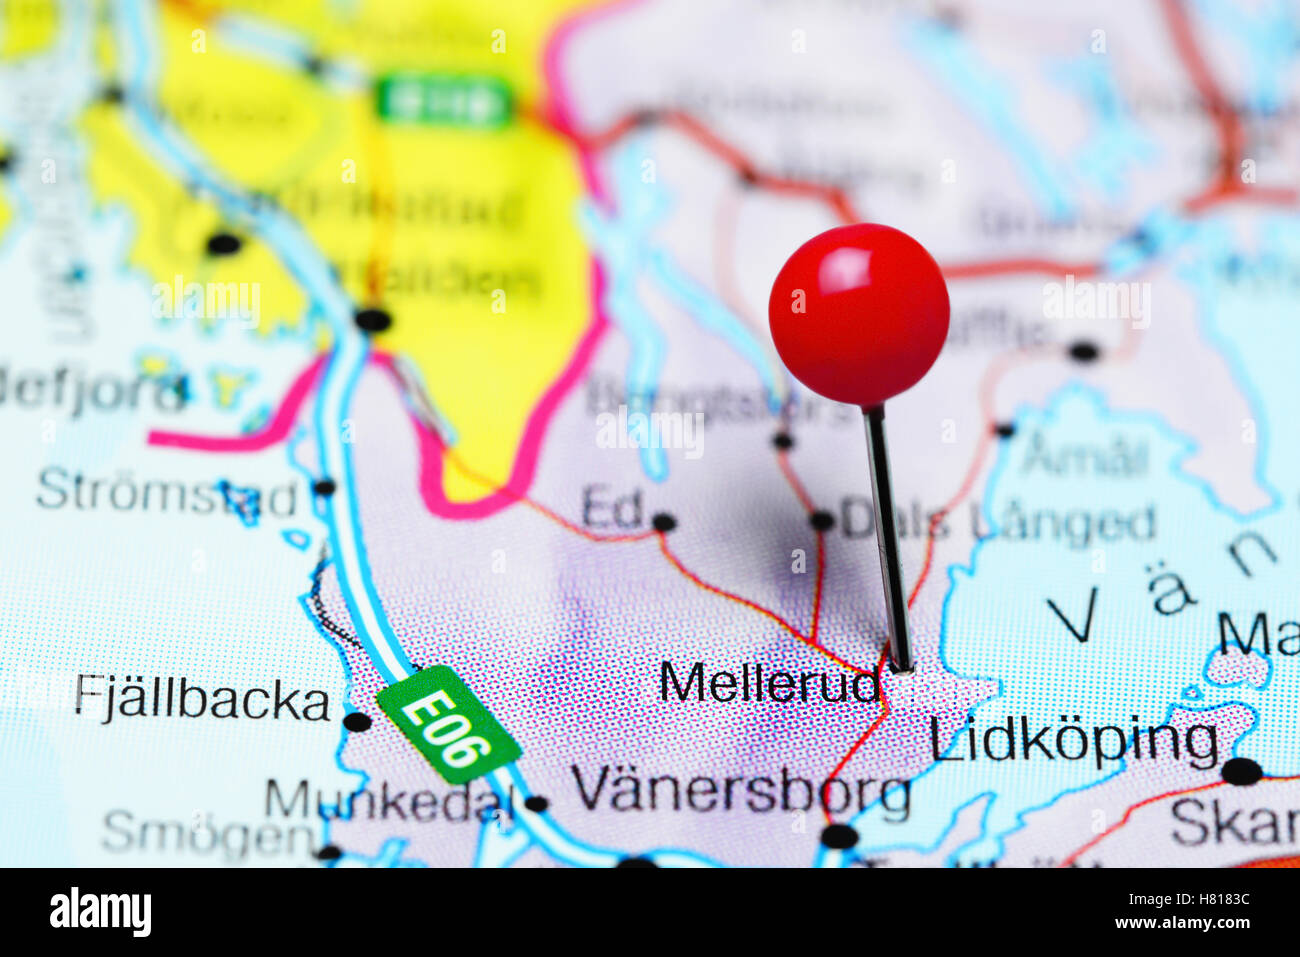 Mellerud pinned on a map of Sweden Stock Photo